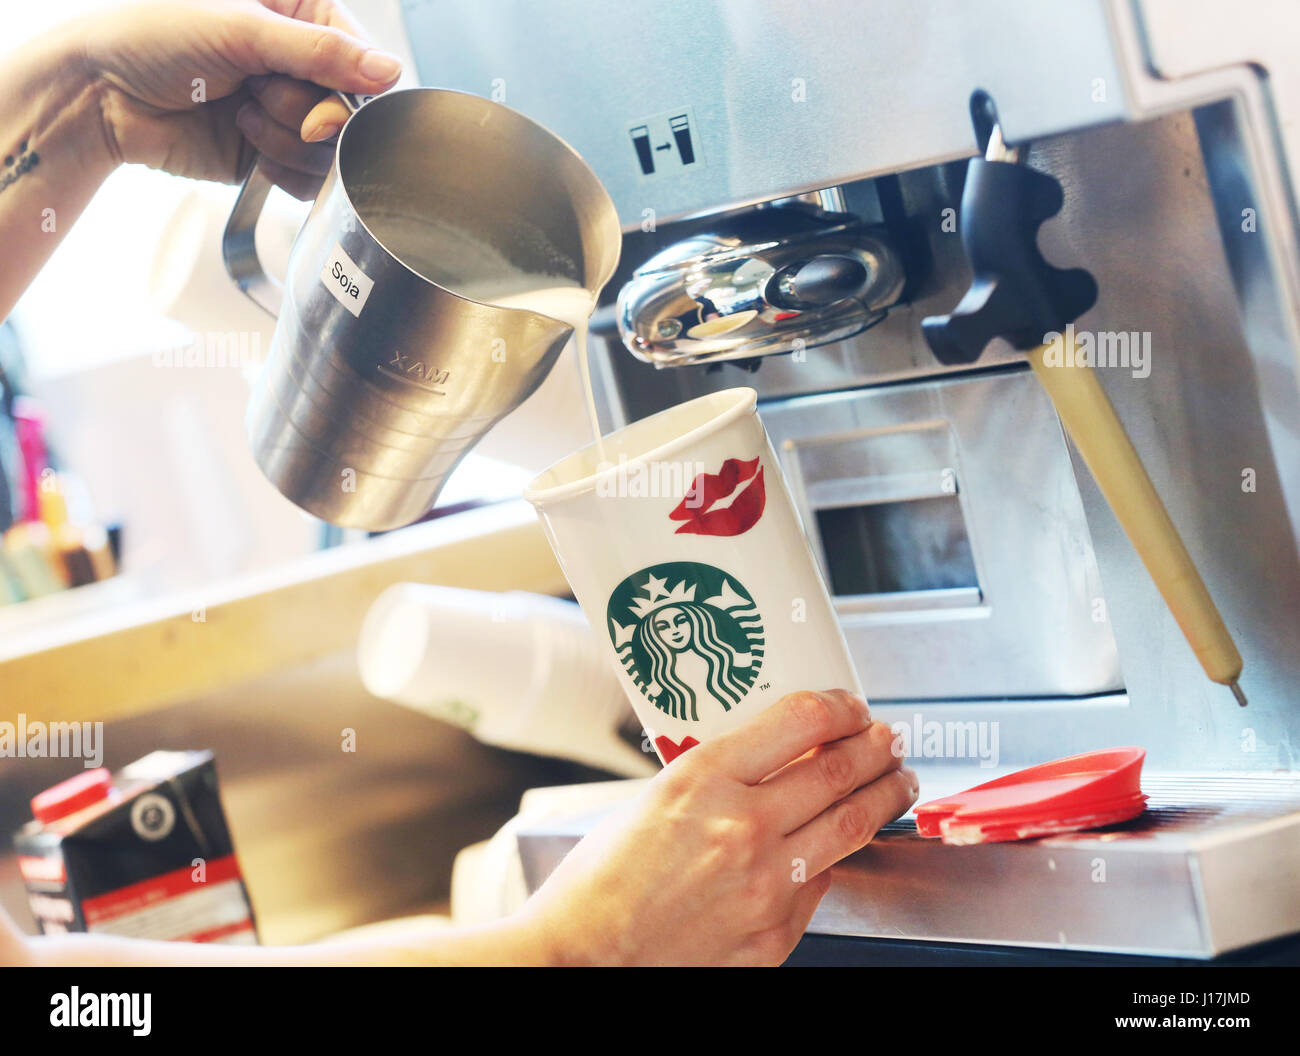 ILLUSTRATION - A Starbucks worker pours a coffee into a reusable cardboard cup in Duisburg, Germany, 19 April 2017. Customers can save 30 cents on their hot beverages if they bring their own cups. Photo: Roland Weihrauch/dpa Stock Photo